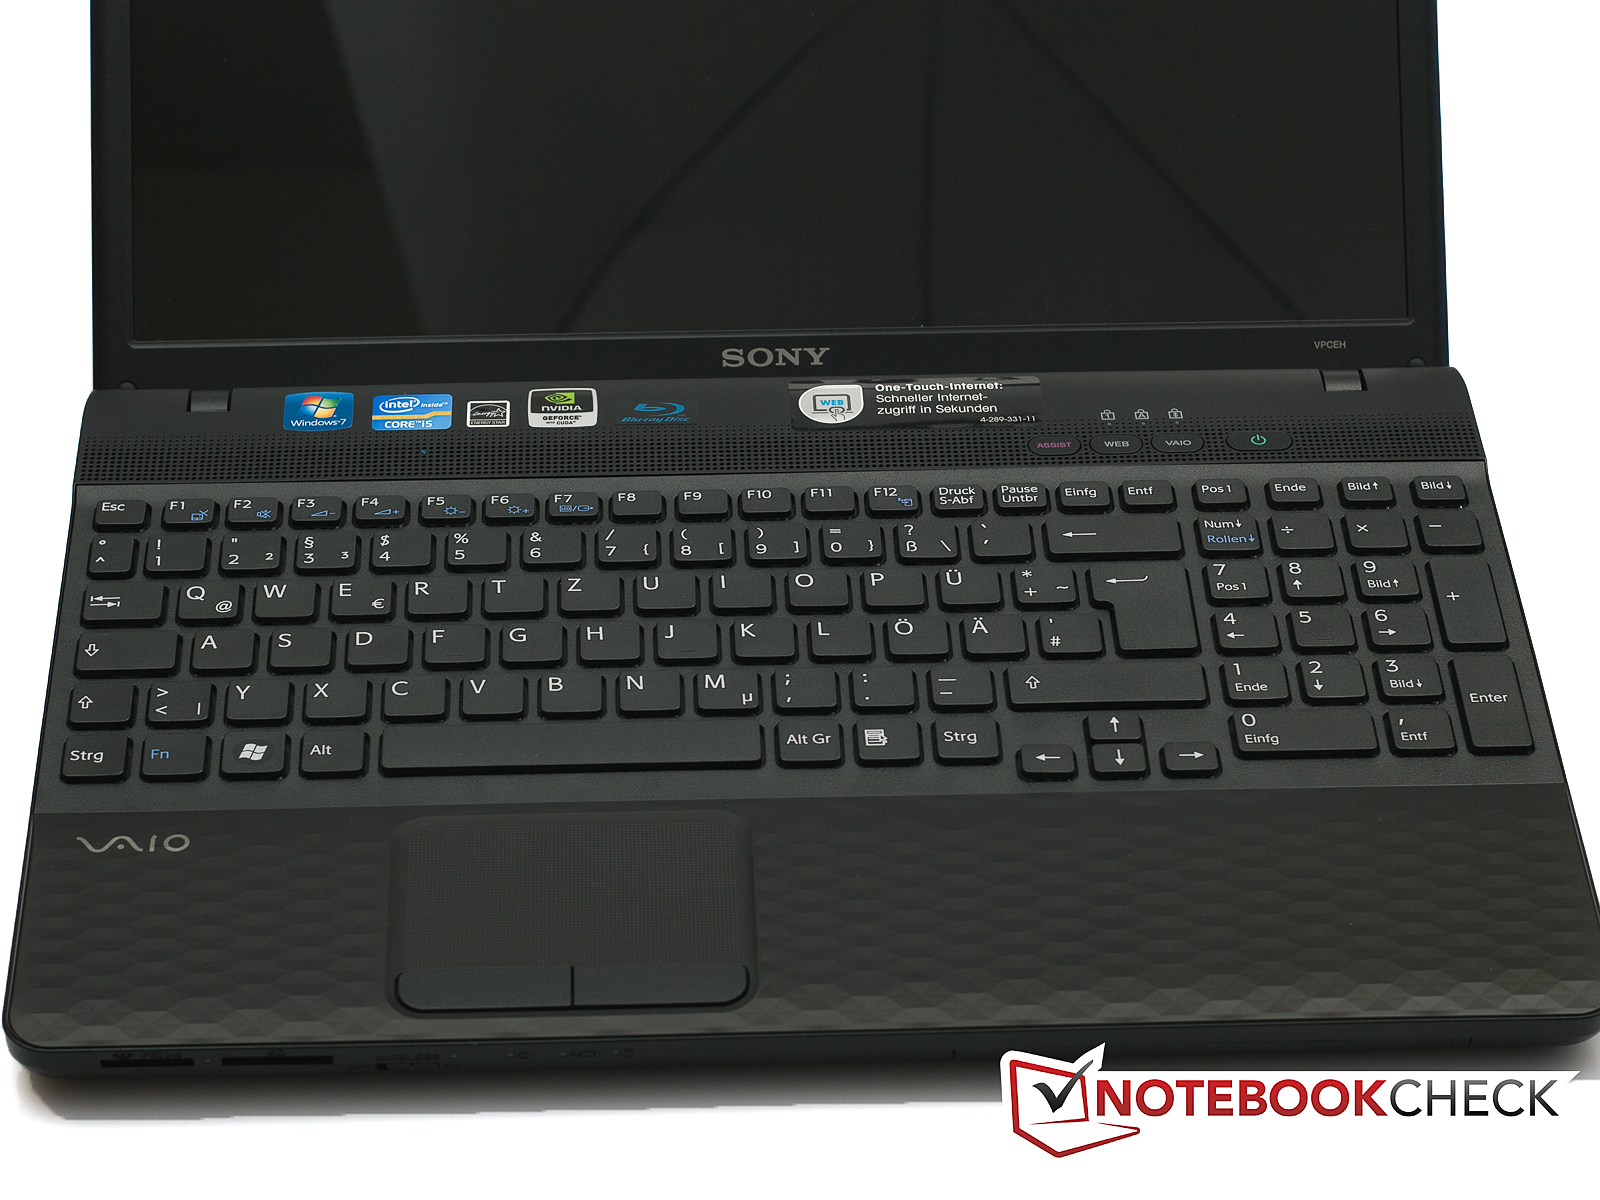 PC/タブレット ノートPC Review Sony Vaio VPC-EH1Z1E/B Notebook - NotebookCheck.net Reviews